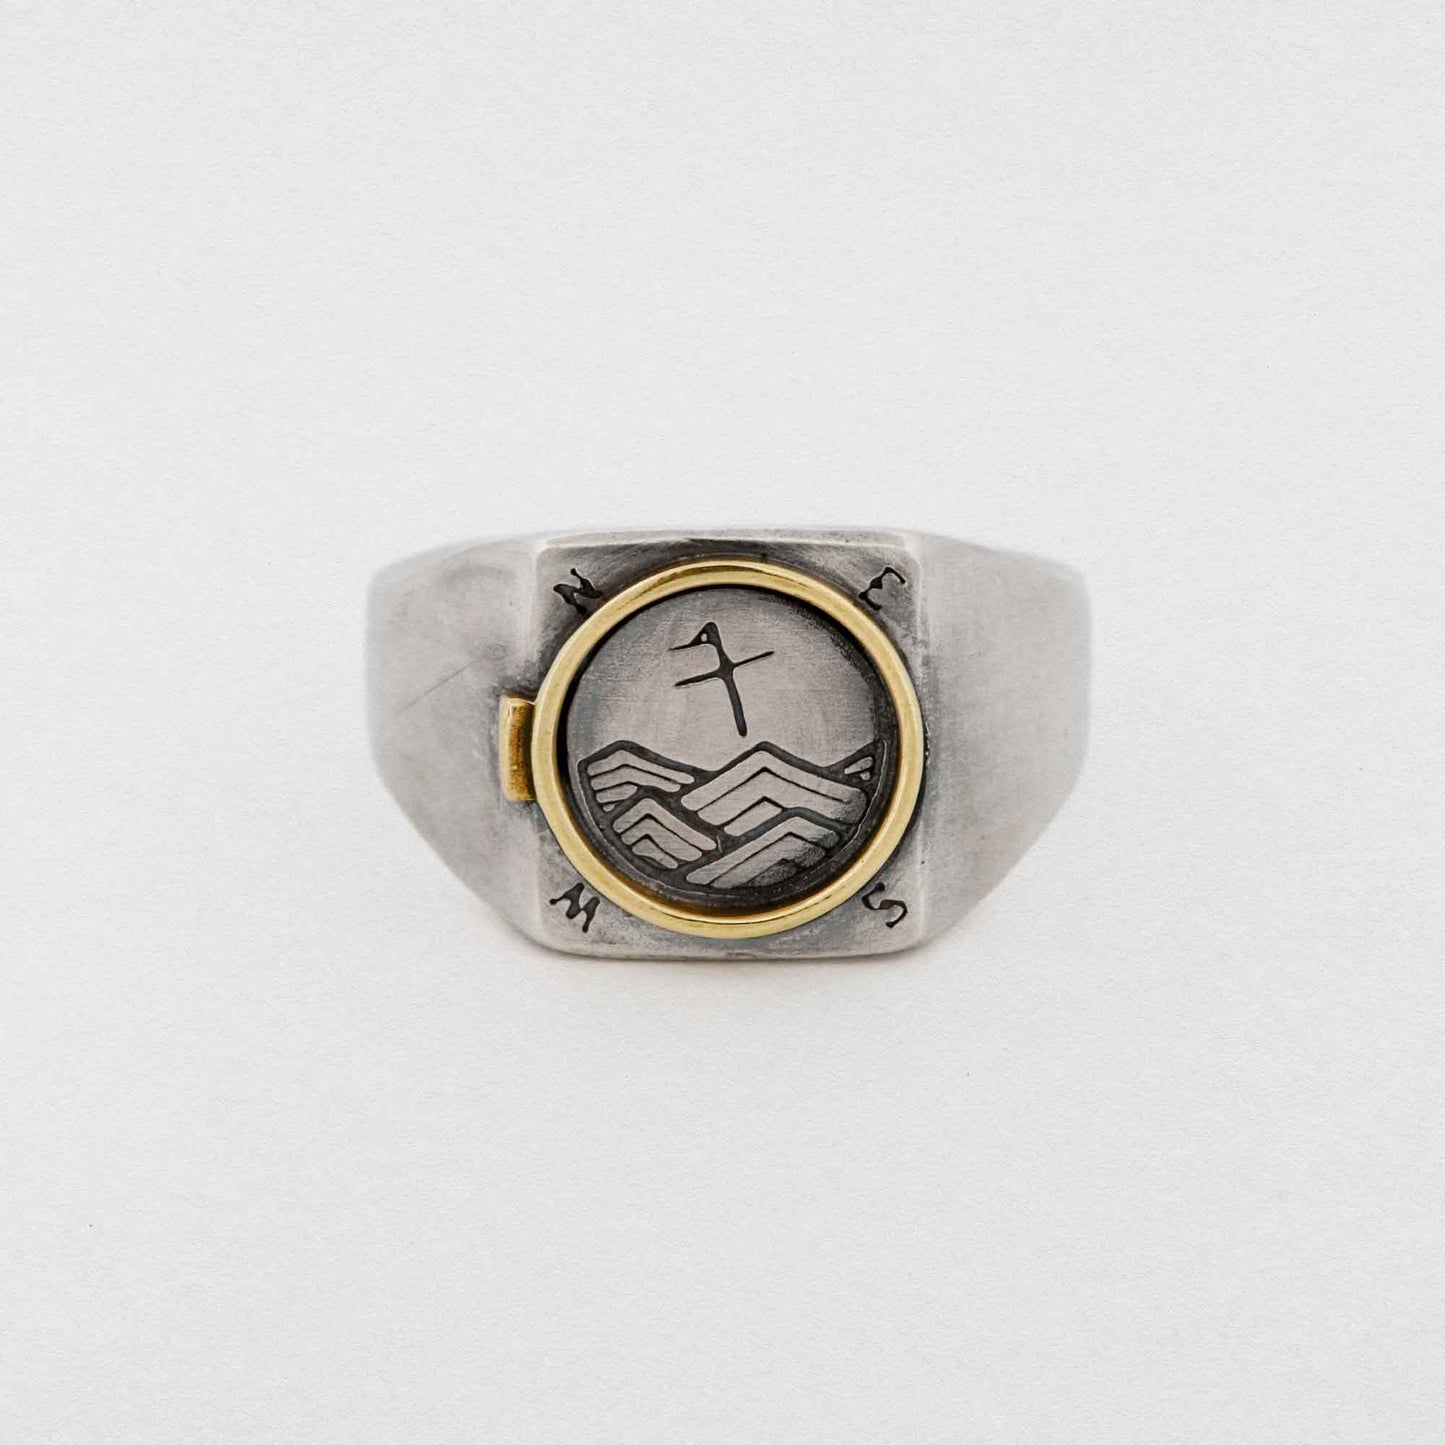 A Silver Signet Ring With Brass Porthole Inlay